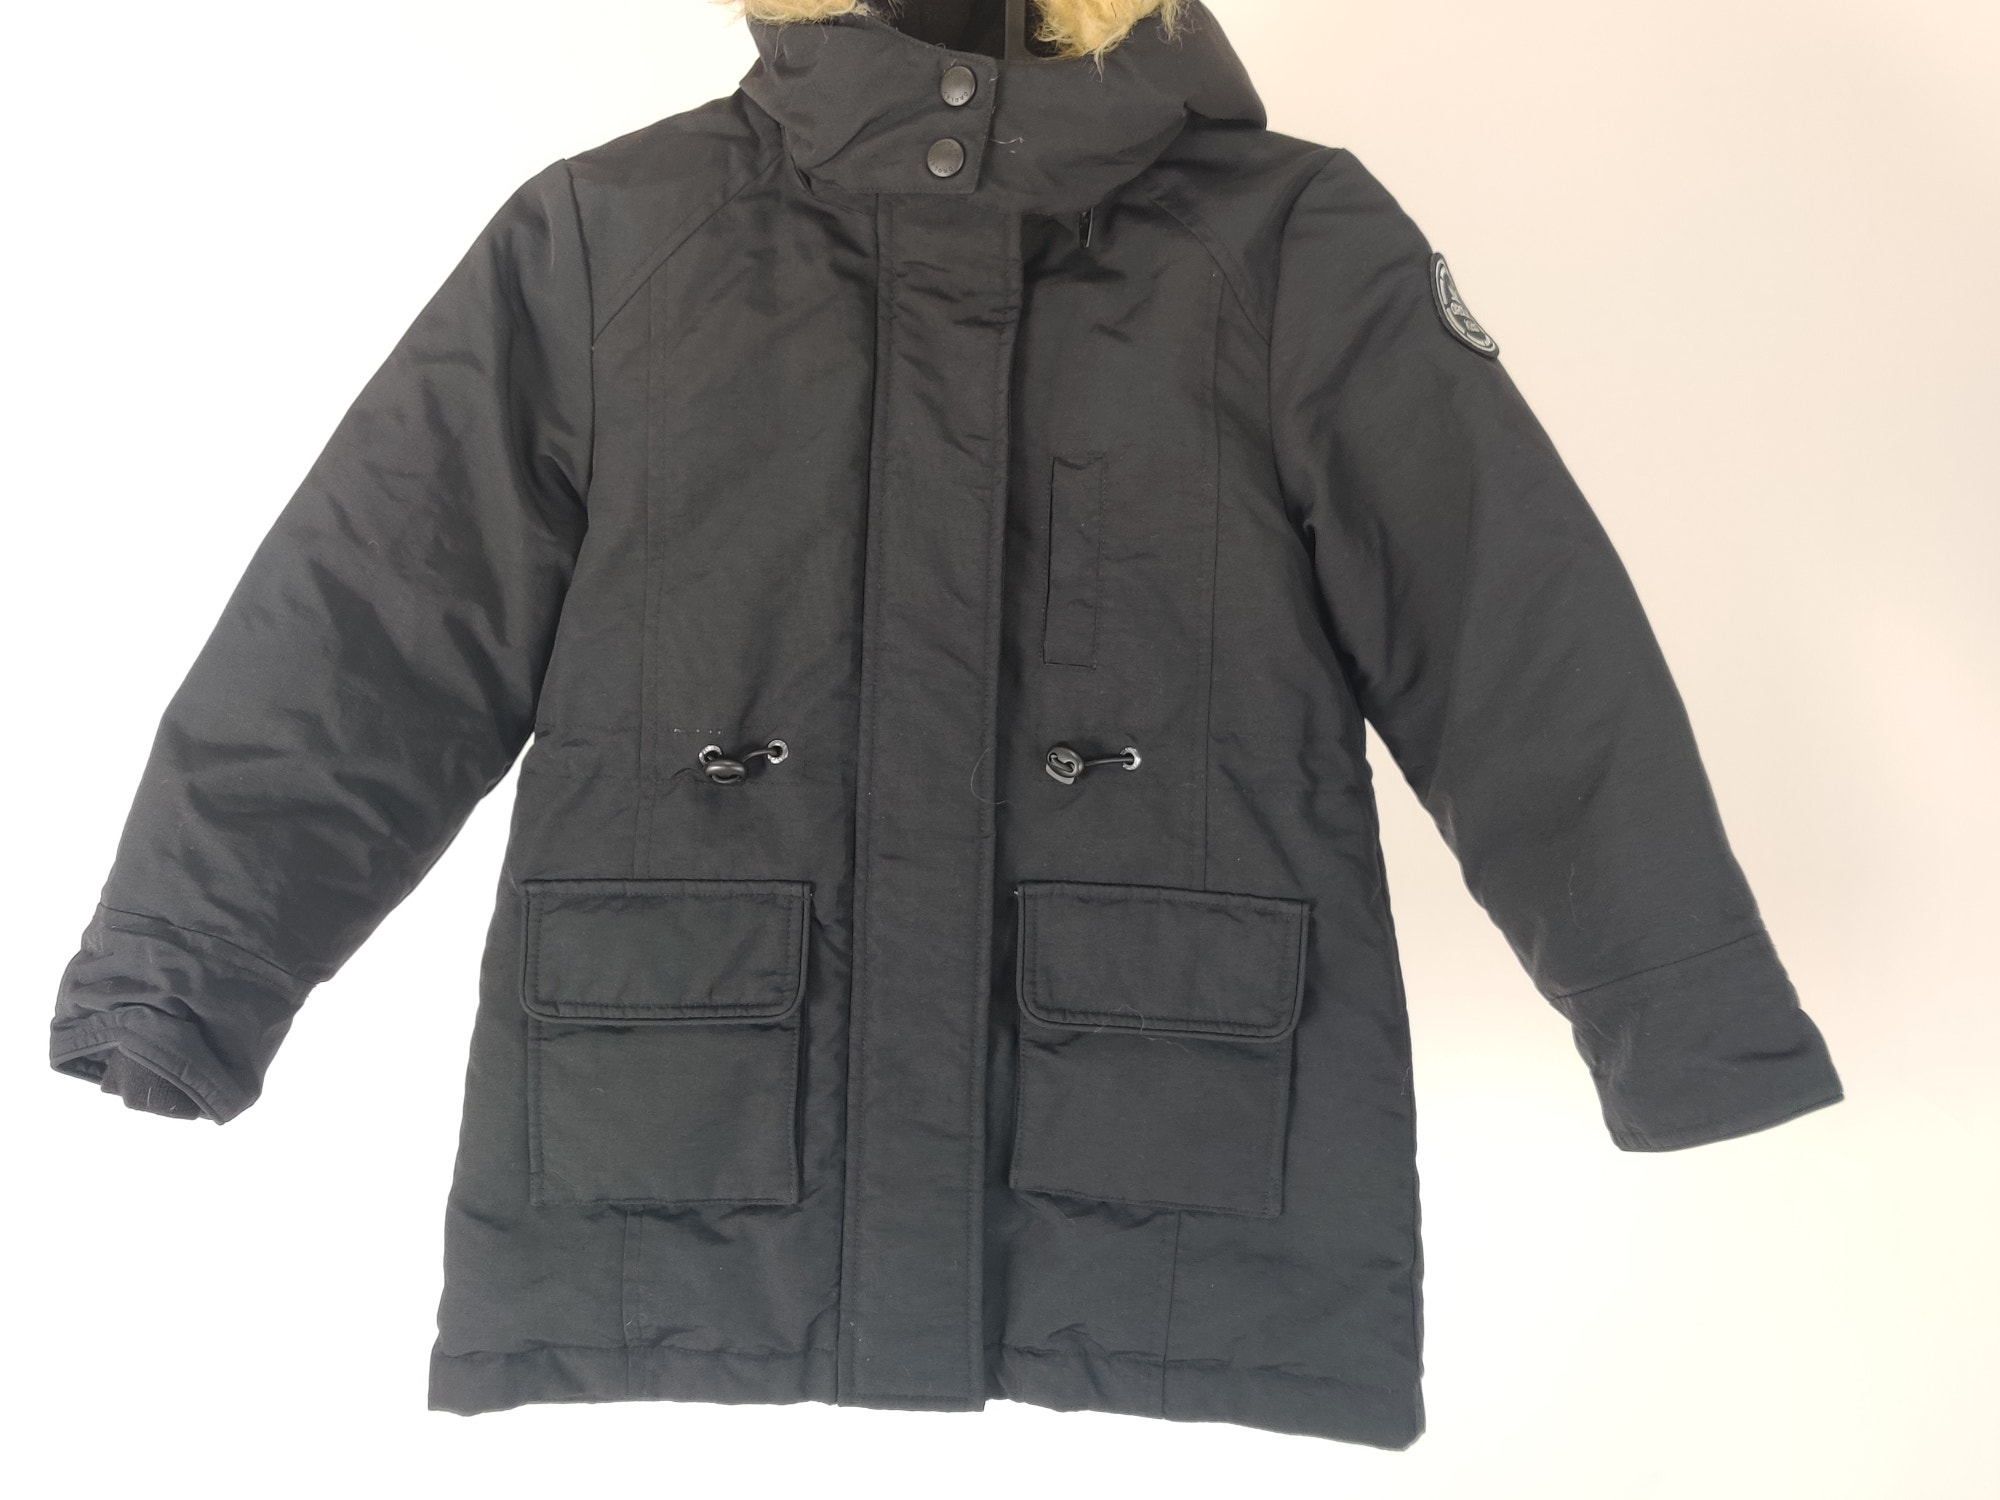 OROLAY KIDS DUCK DOWN HOOD GIRL'S BLACK POCKETS KID'S JACKET SIZE 6-7Y - Picture 5 of 12